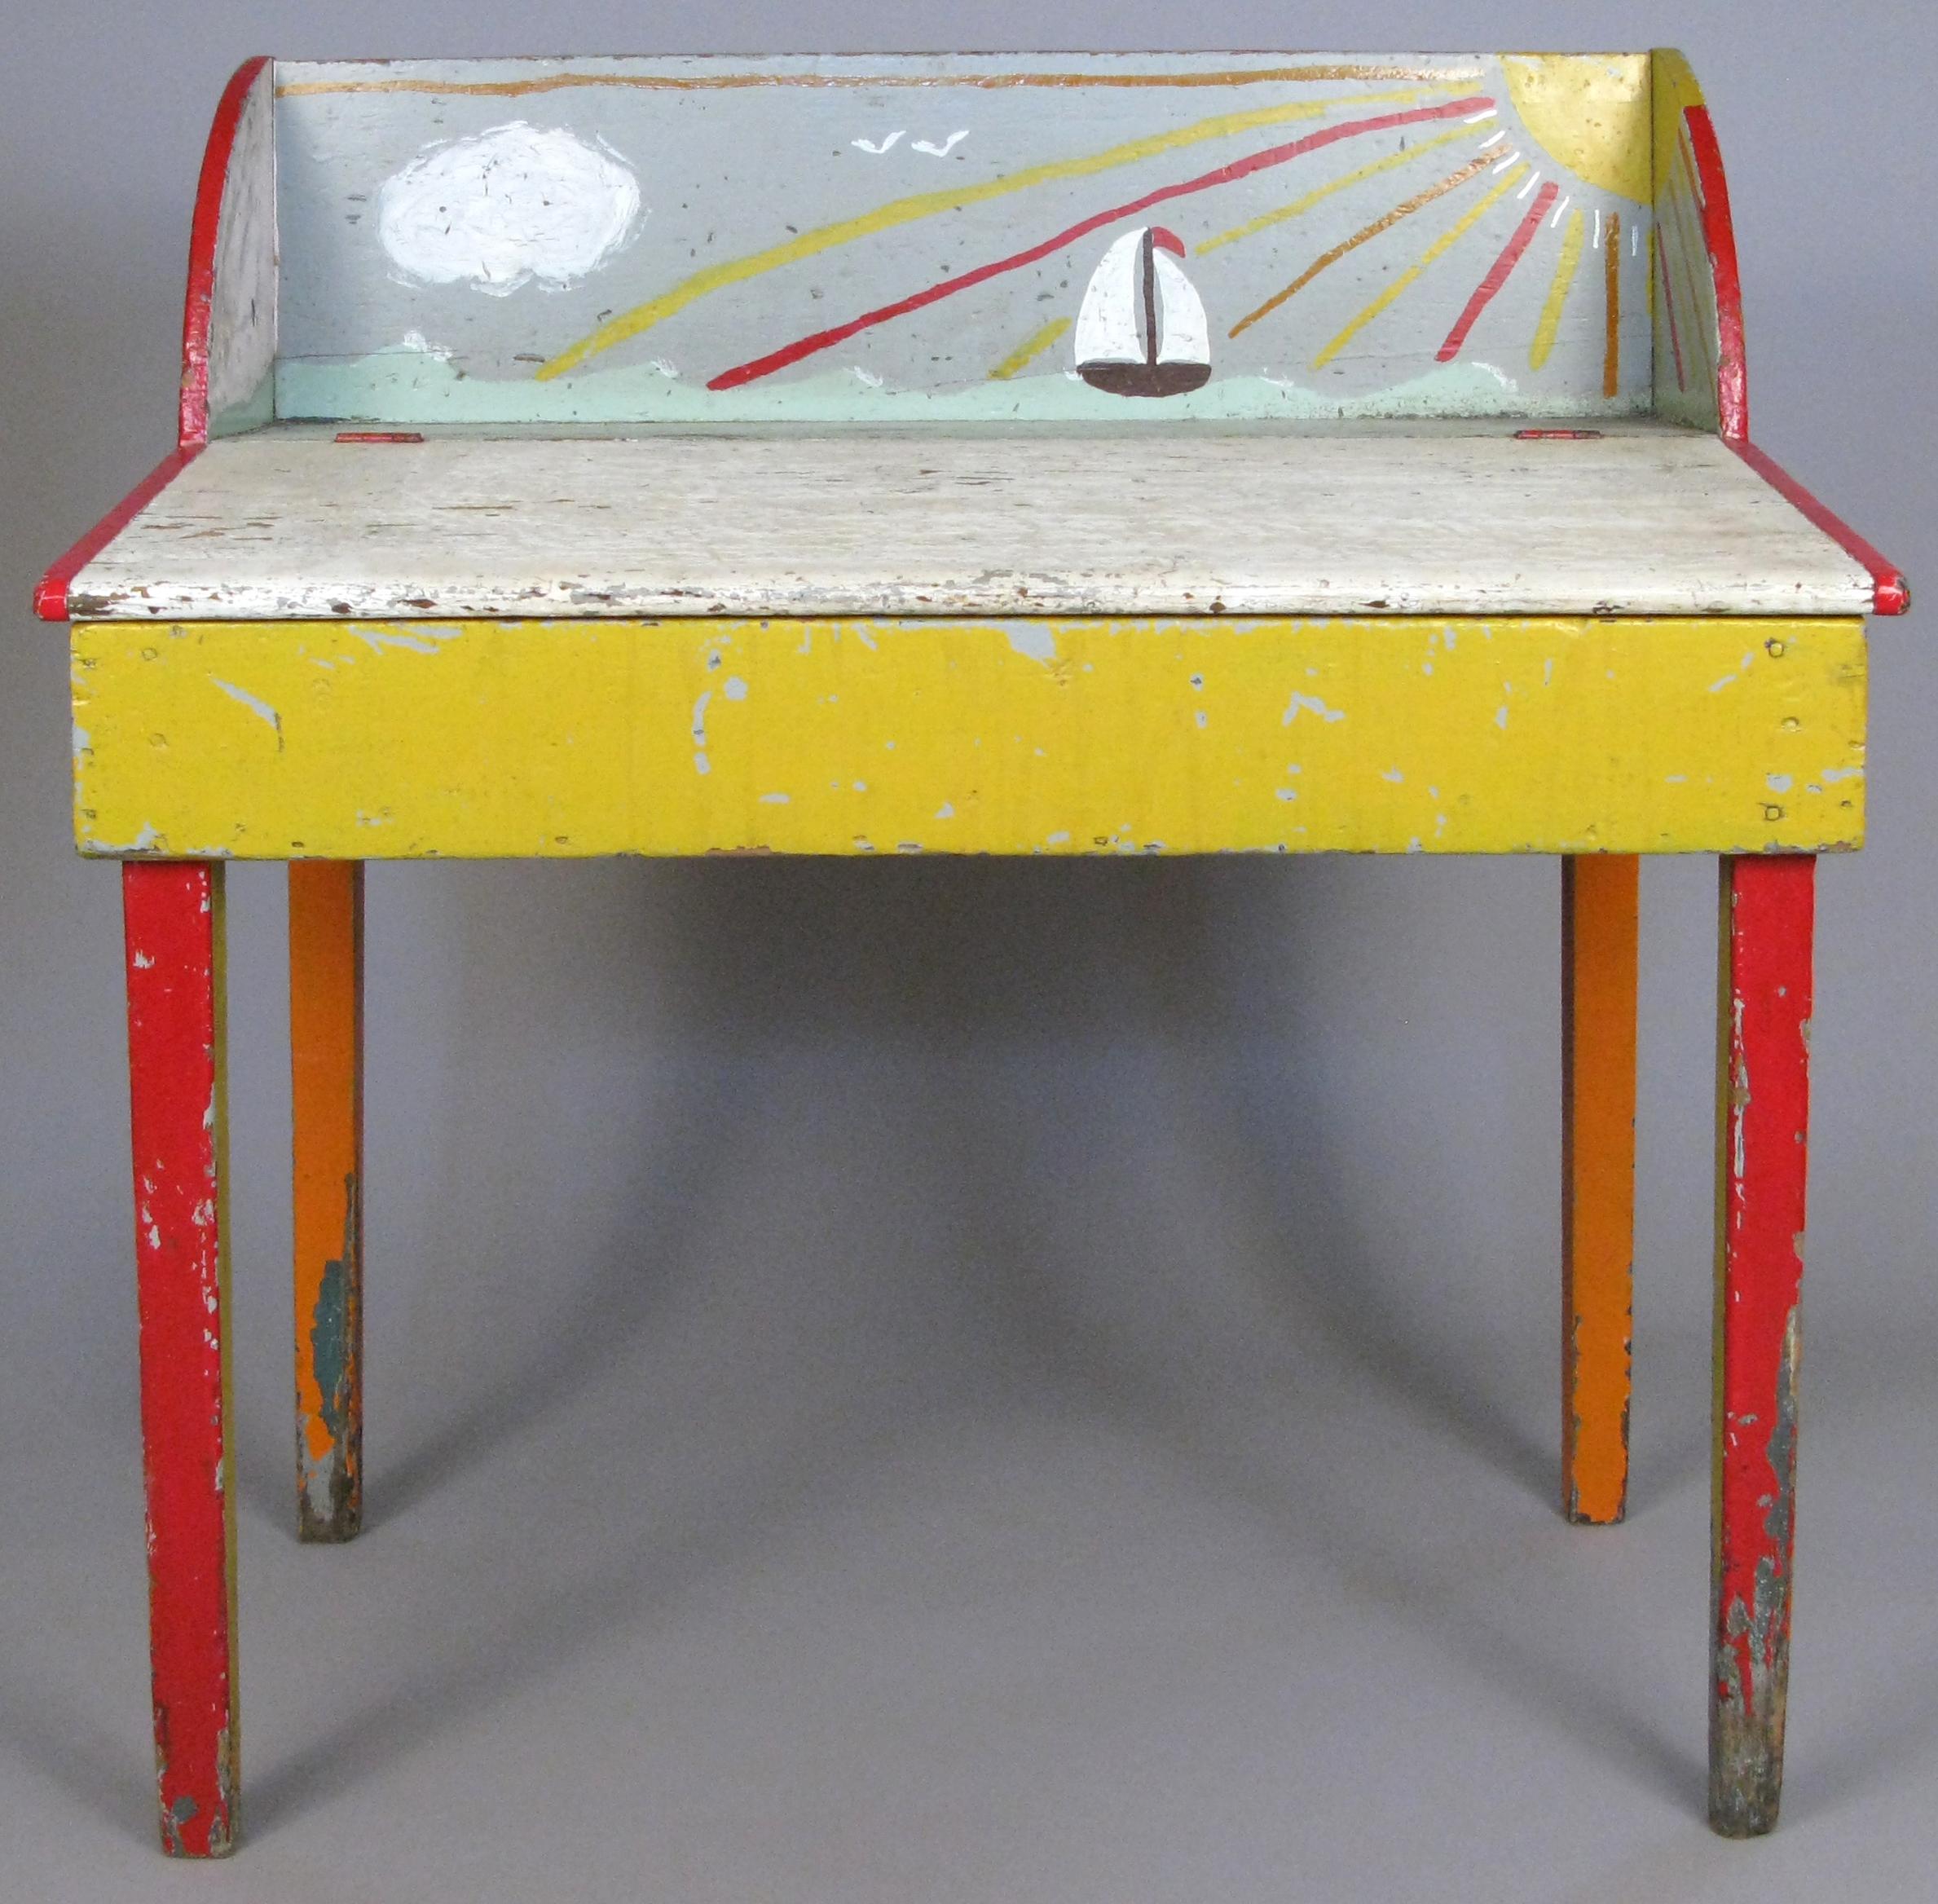 A very charming antique 19th century slant front pine desk found in Cape Cod, MA. Entirely hand painted in colors of red, yellow, orange, and white, with a whimsical ocean scene of a sailboat and the sun. Has a hinged work surface.